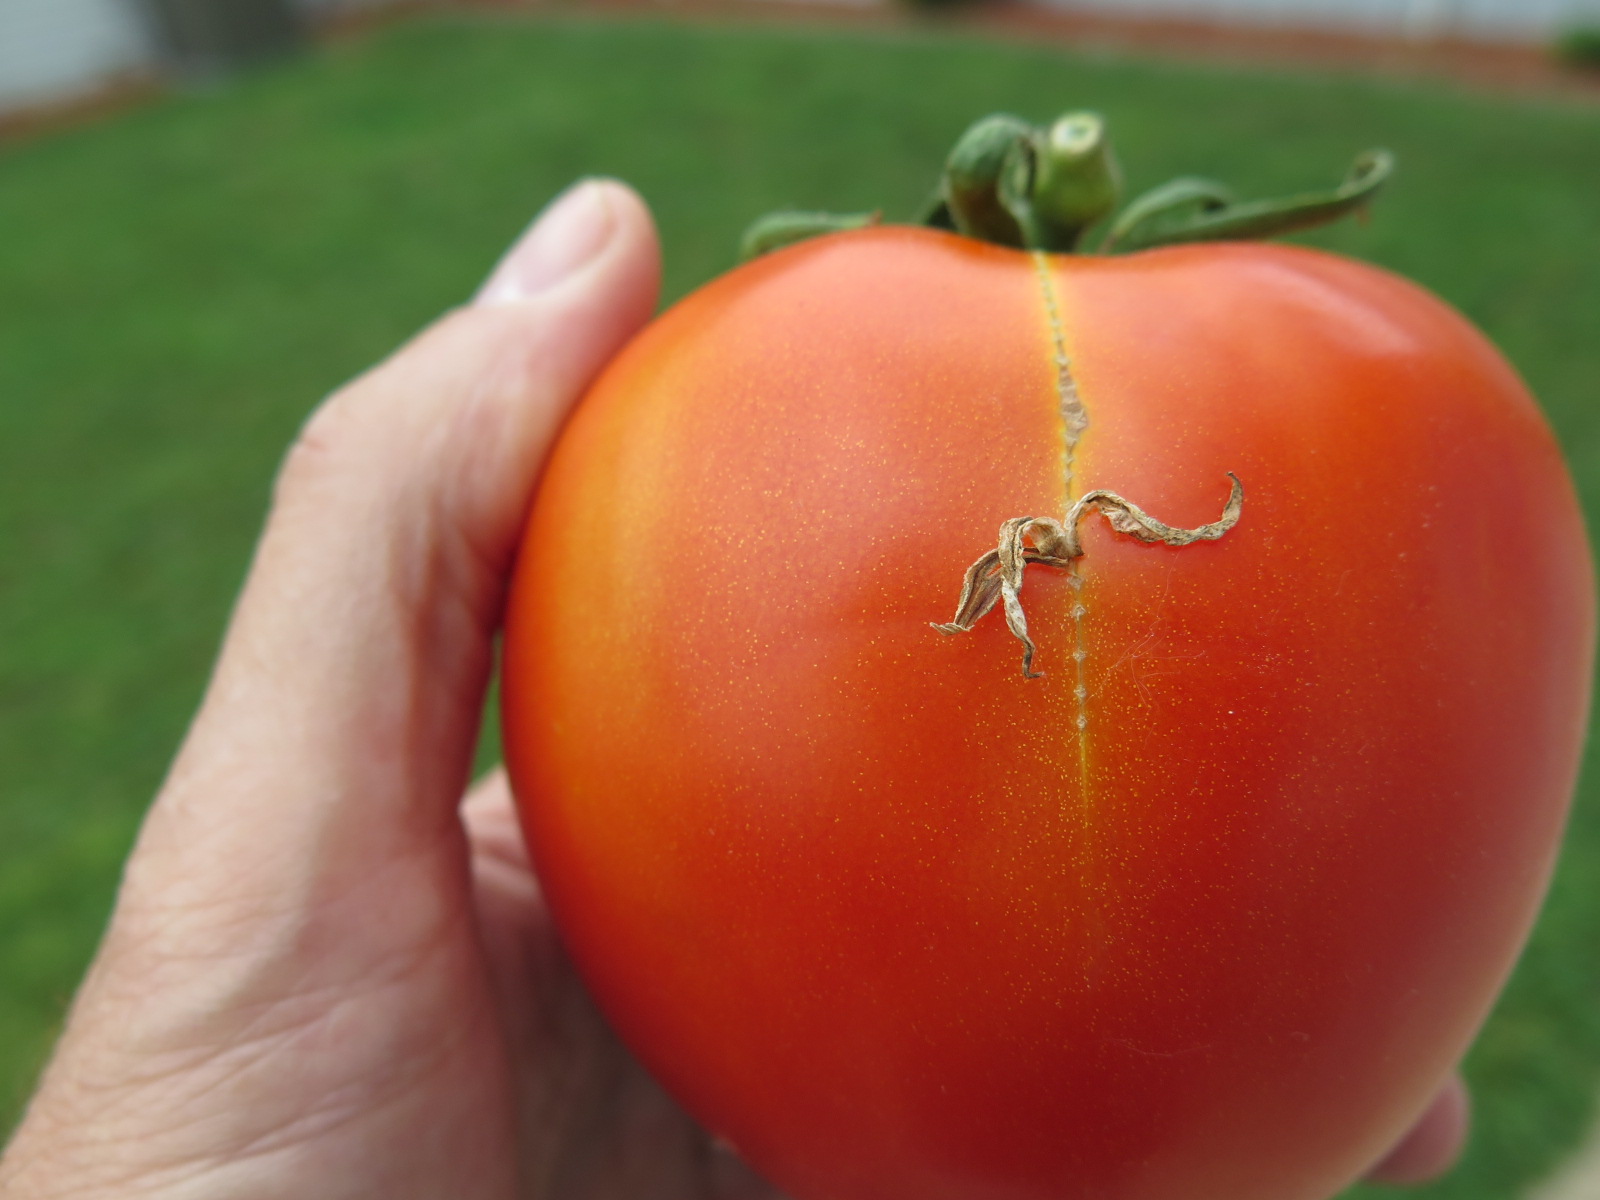 Zipper scar on tomato. Note flower adhering to fruit.